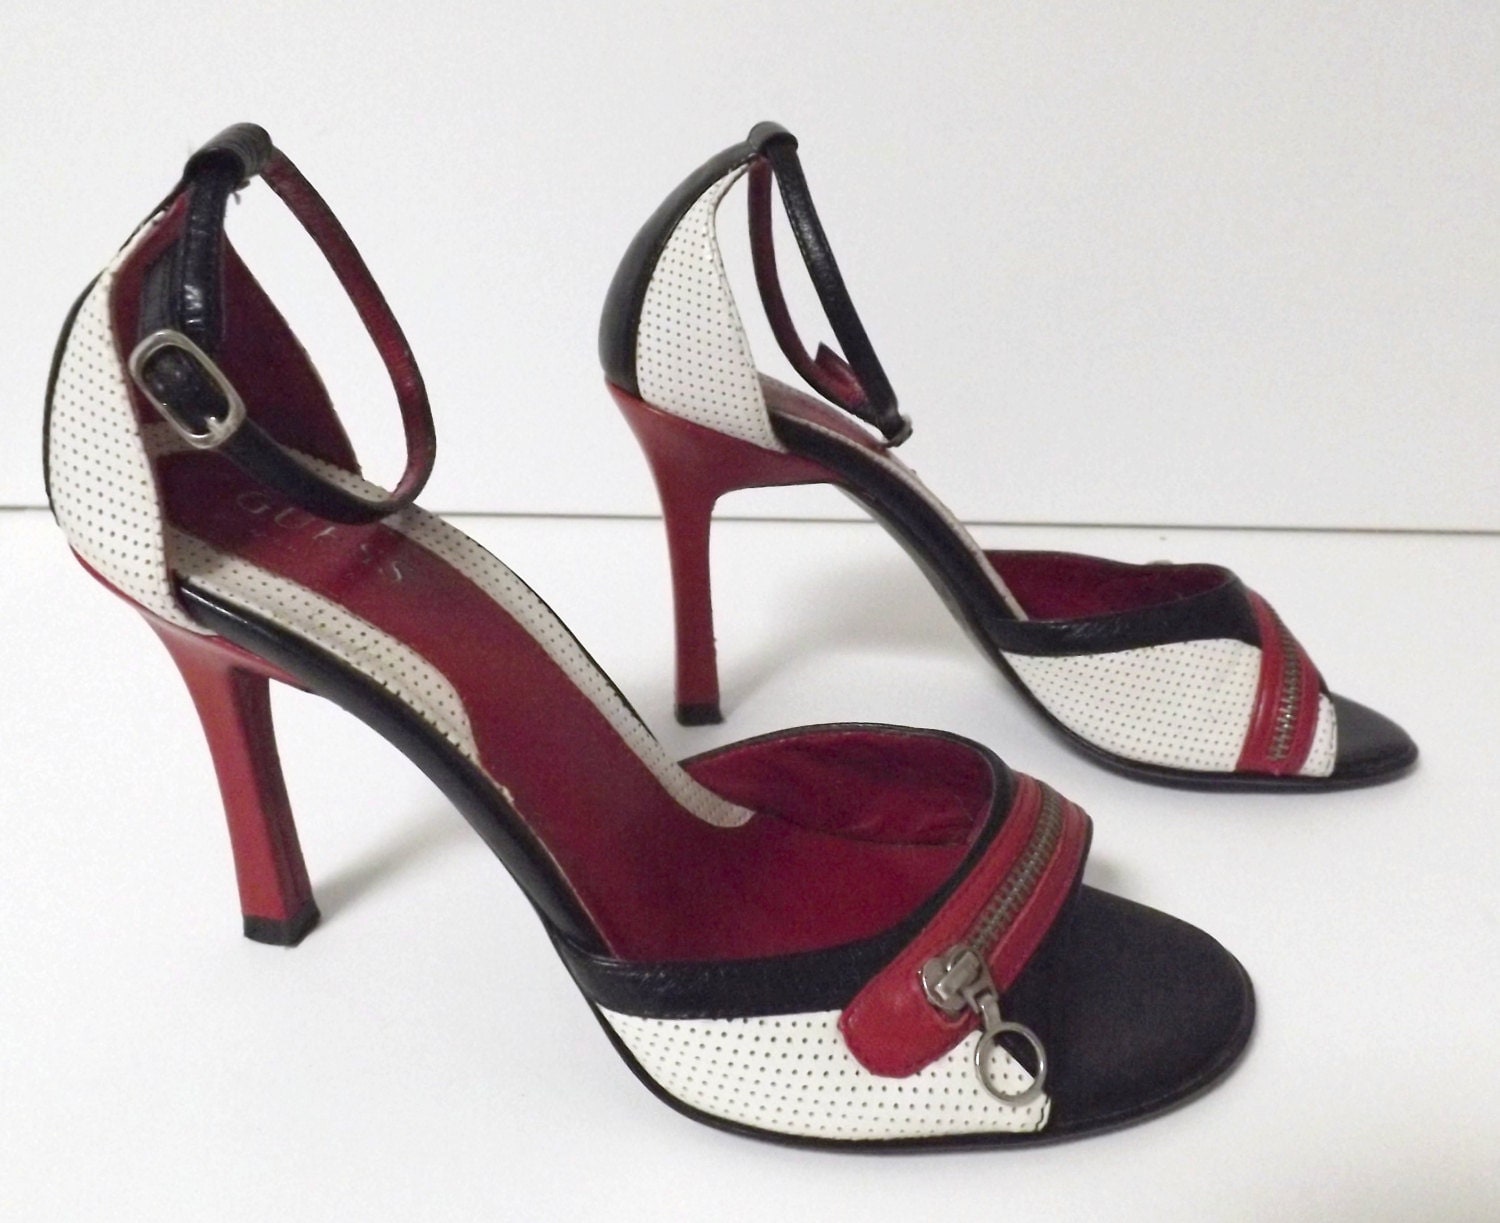 Vintage 90's Guess Stiletto Heels with Zippers Strappy